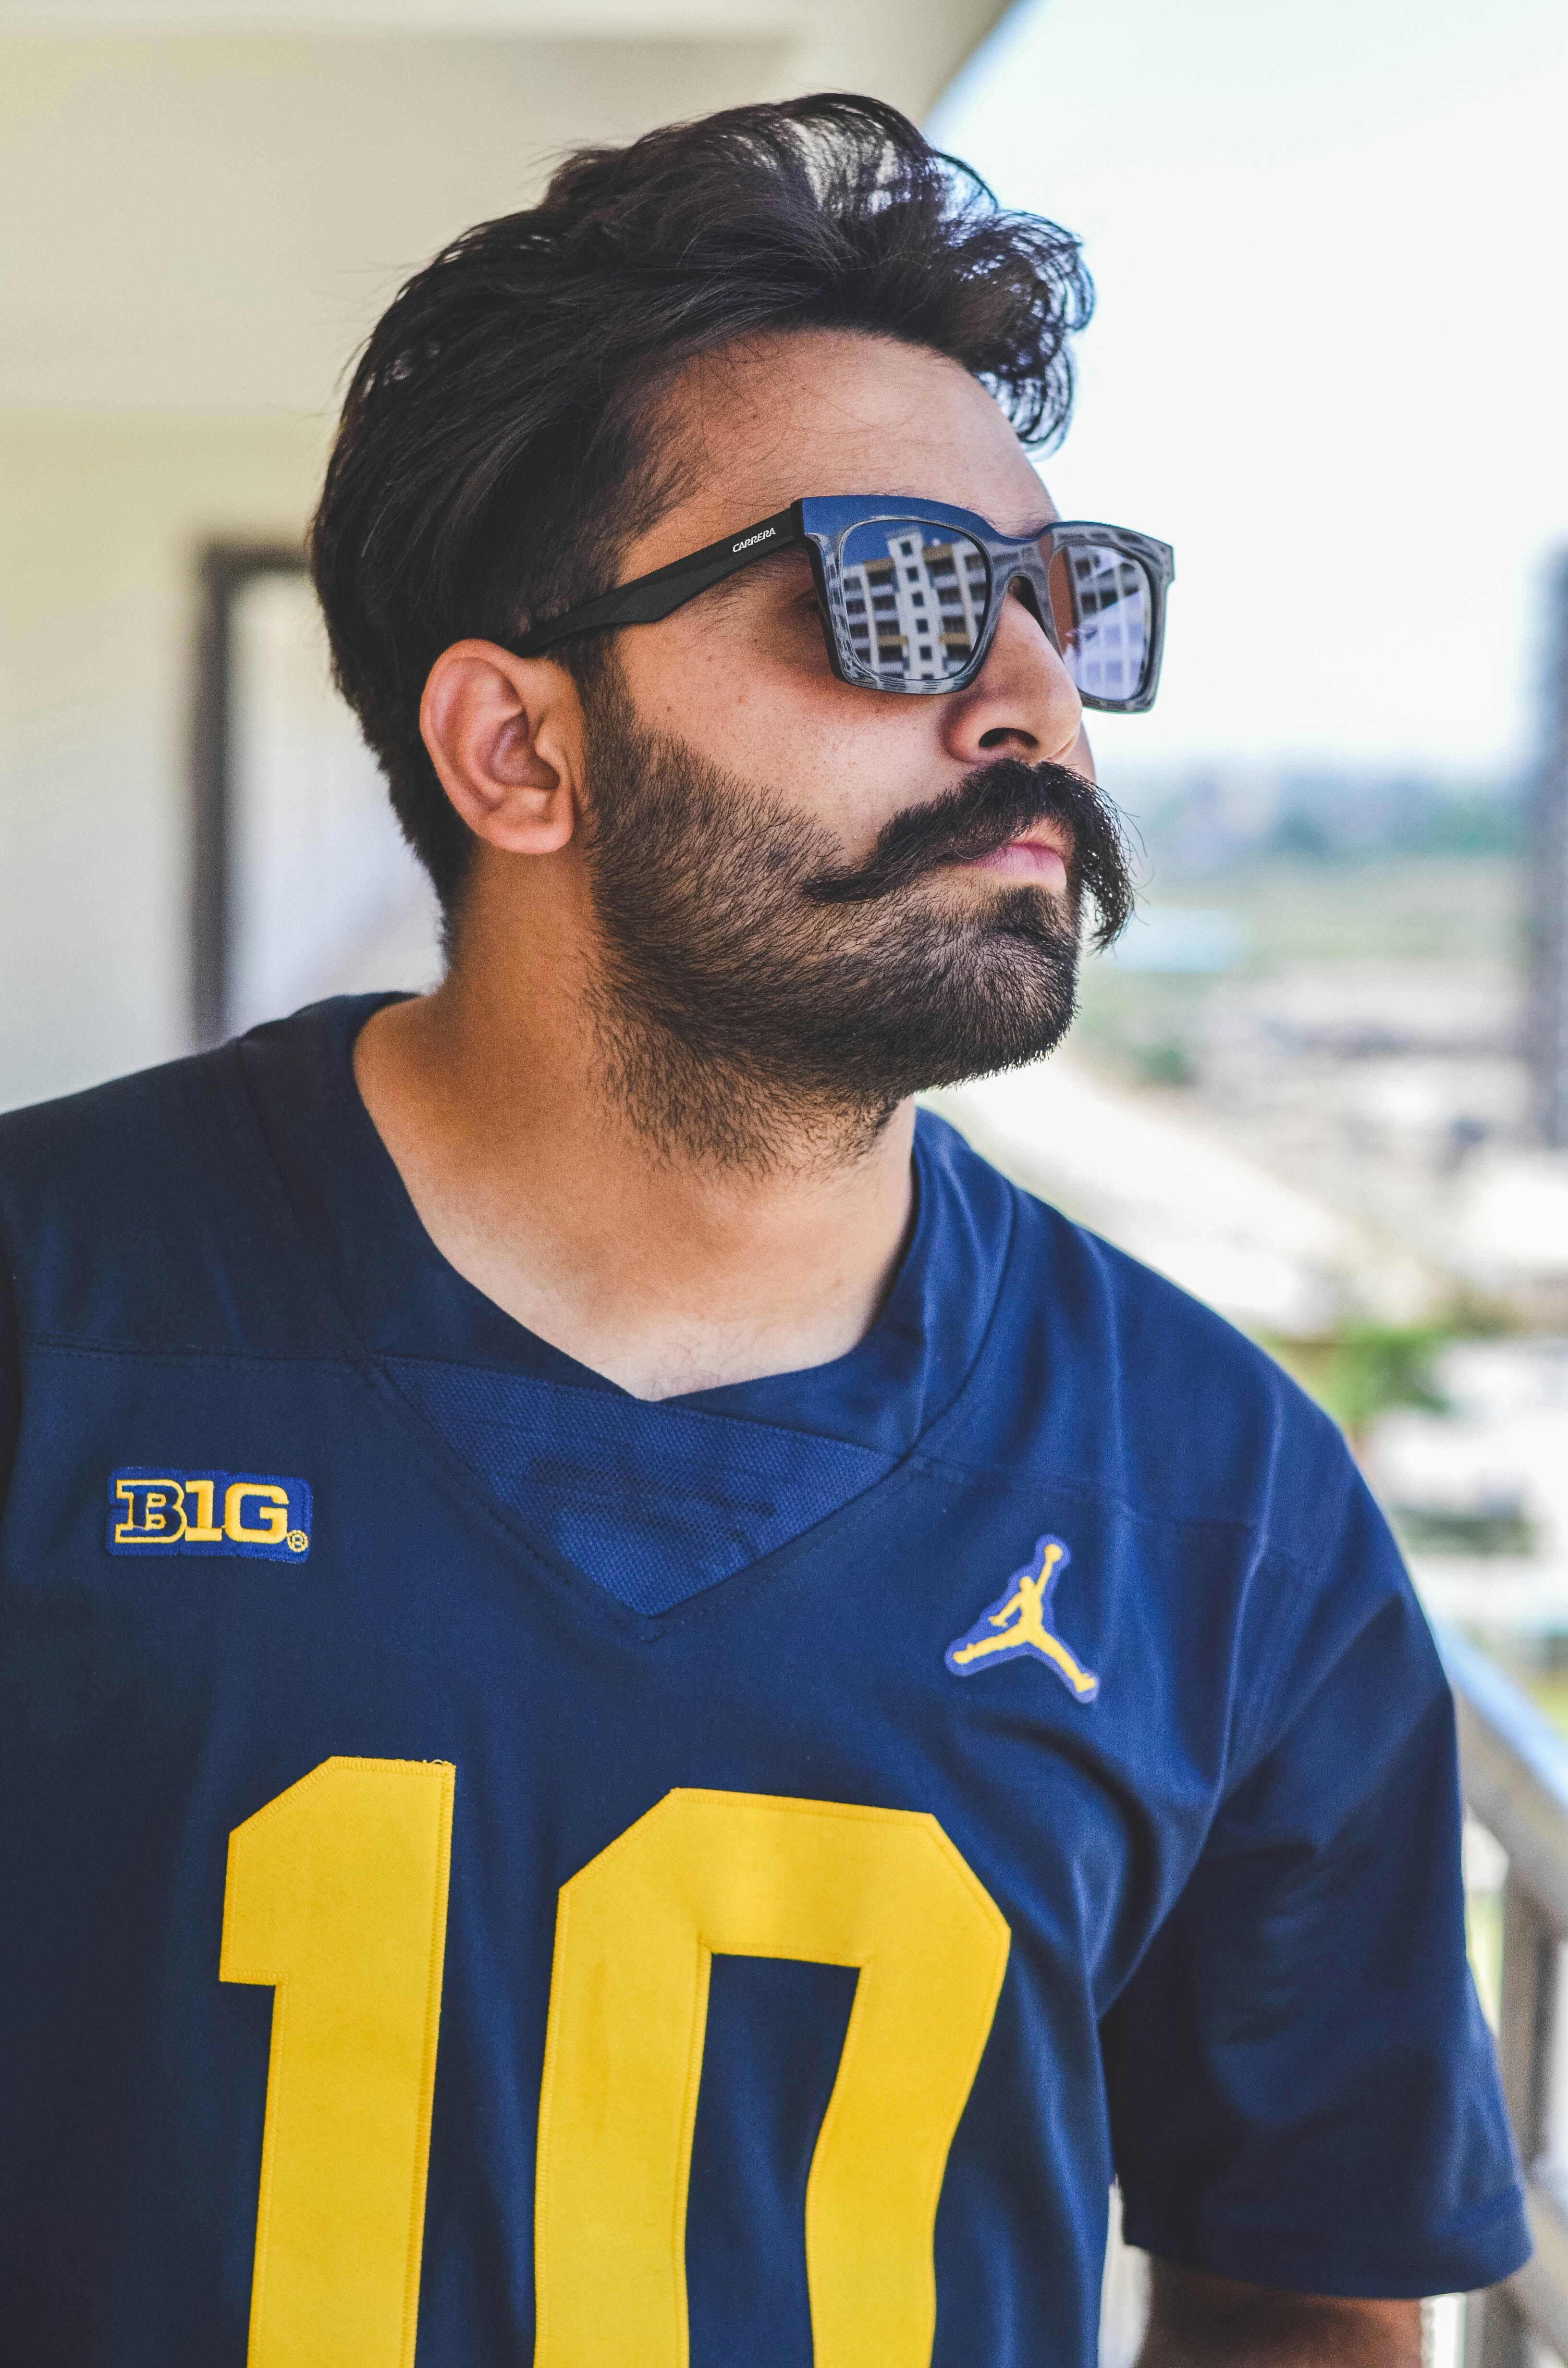 man in blue and yellow adidas v neck shirt wearing black sunglasses